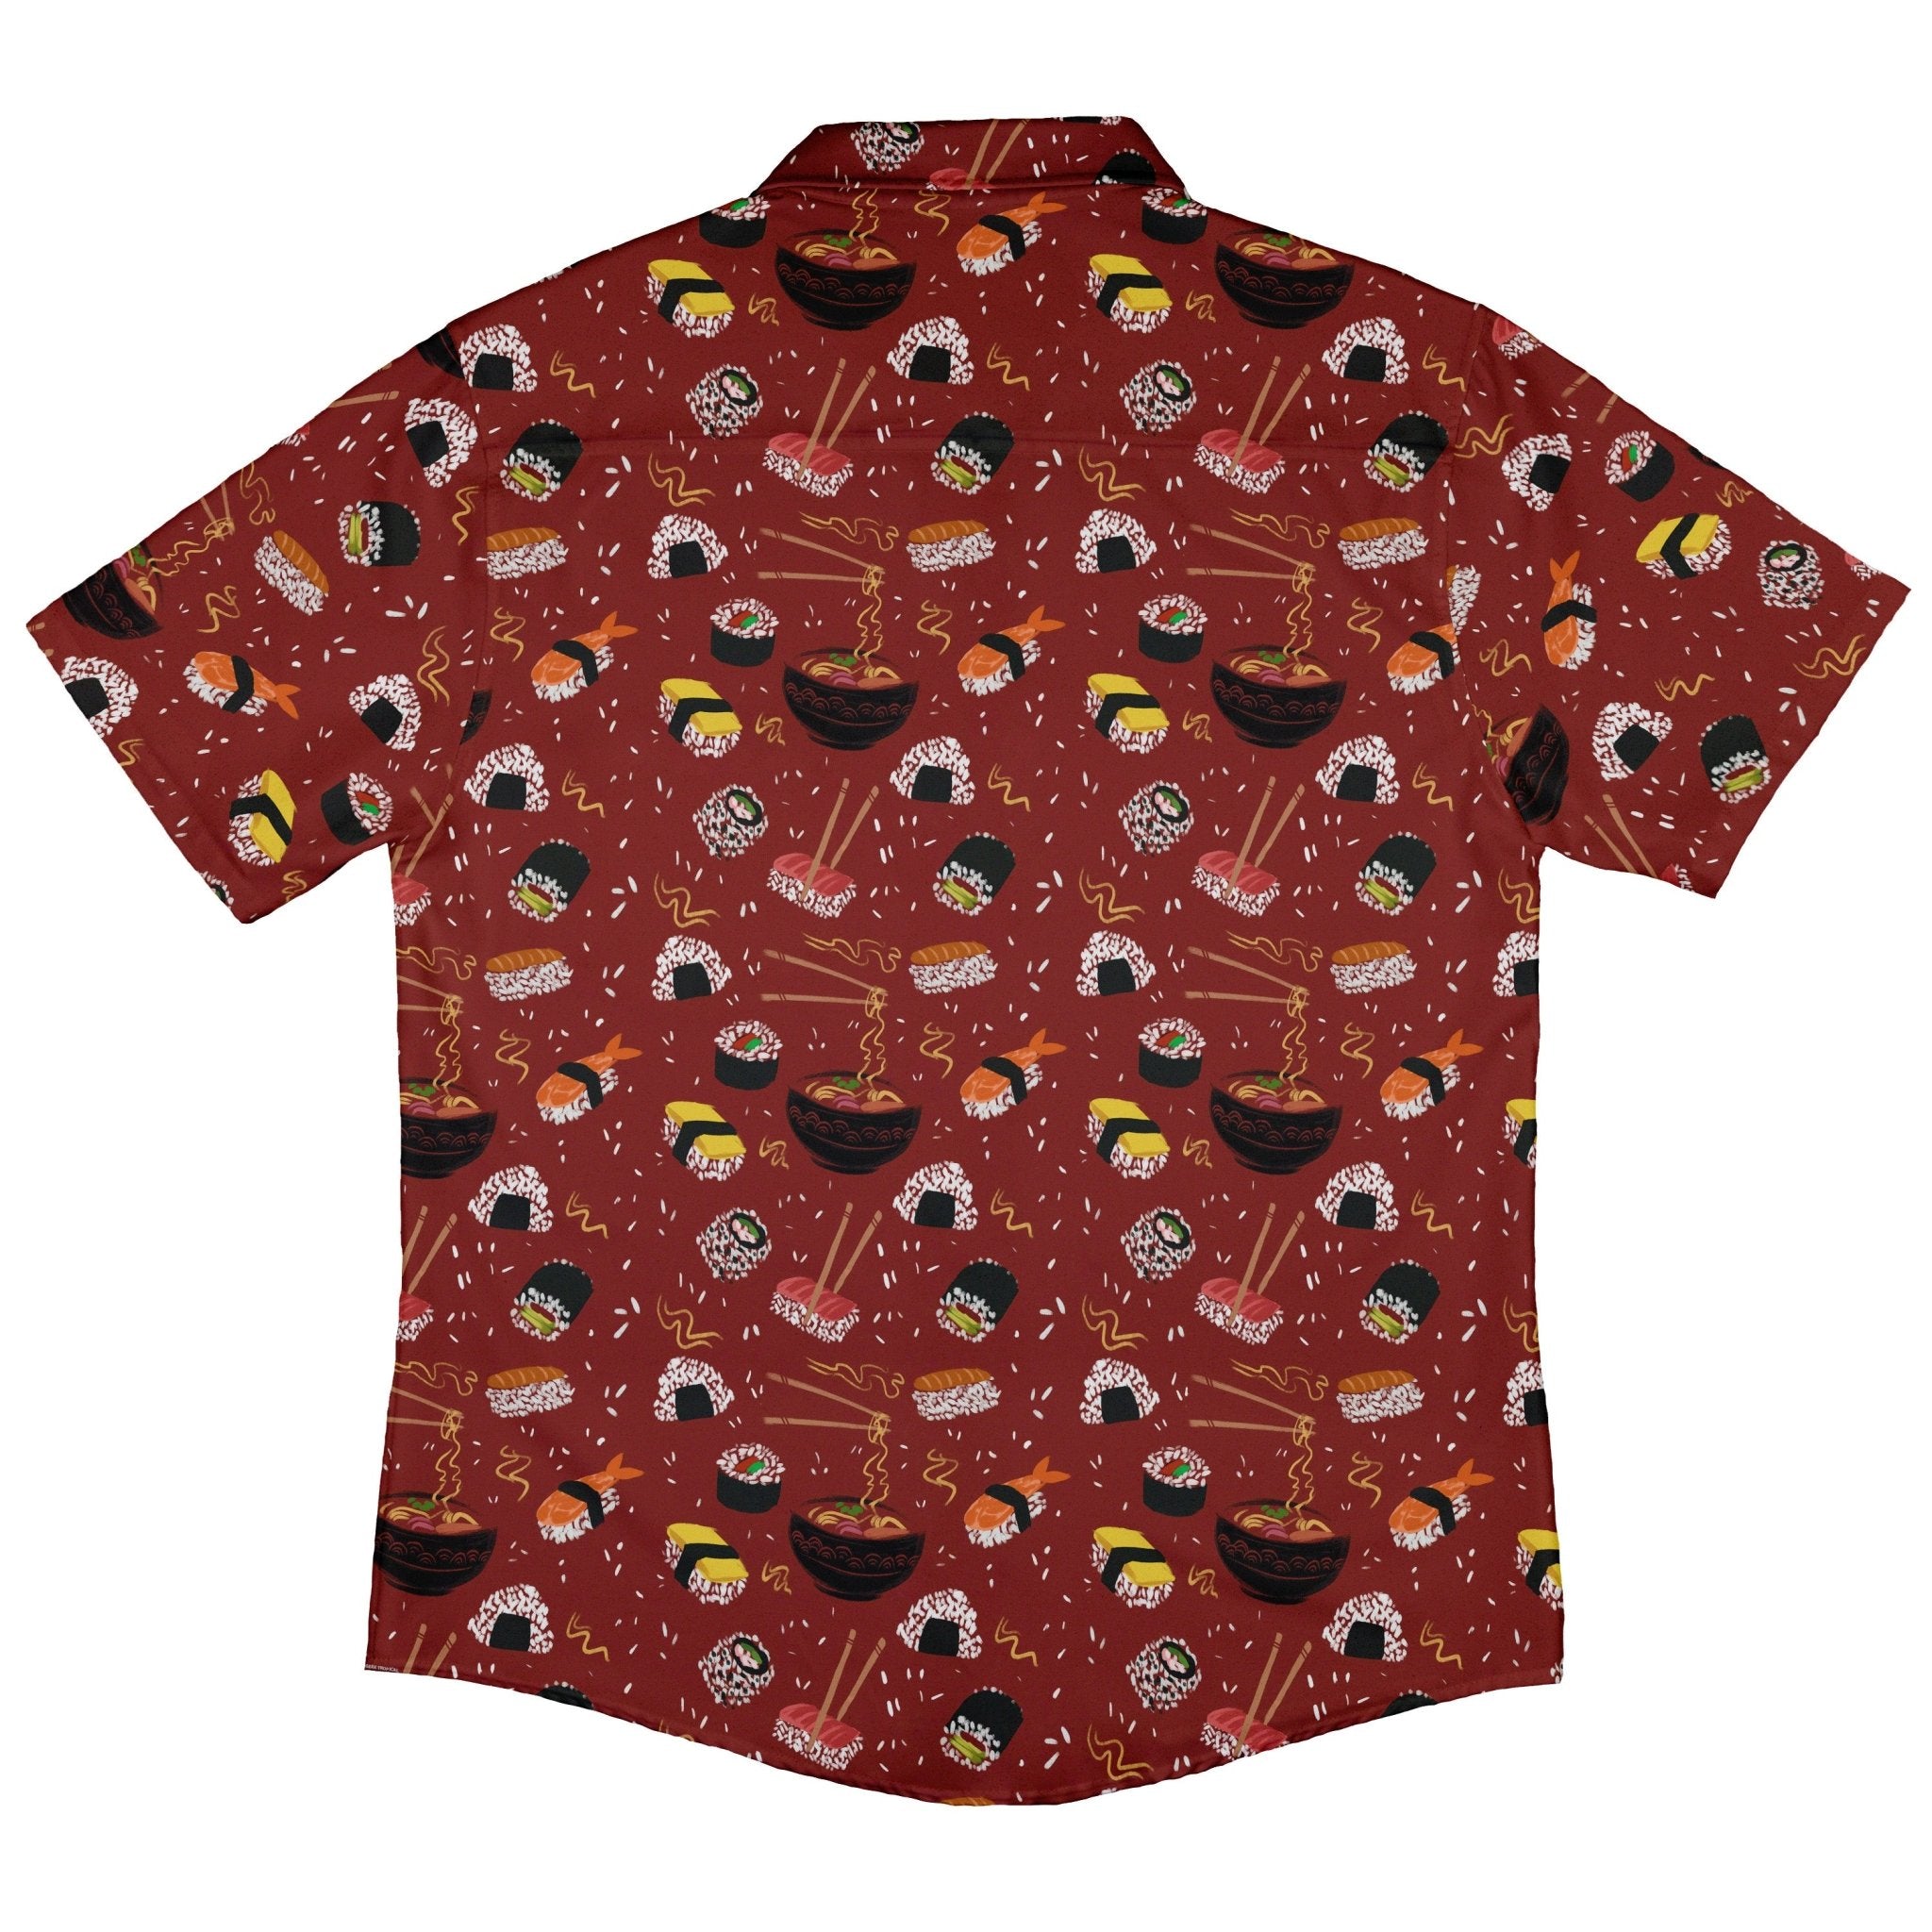 Ōishi Sushi Red Button Up Shirt - adult sizing - Anime - Design by Claire Murphy